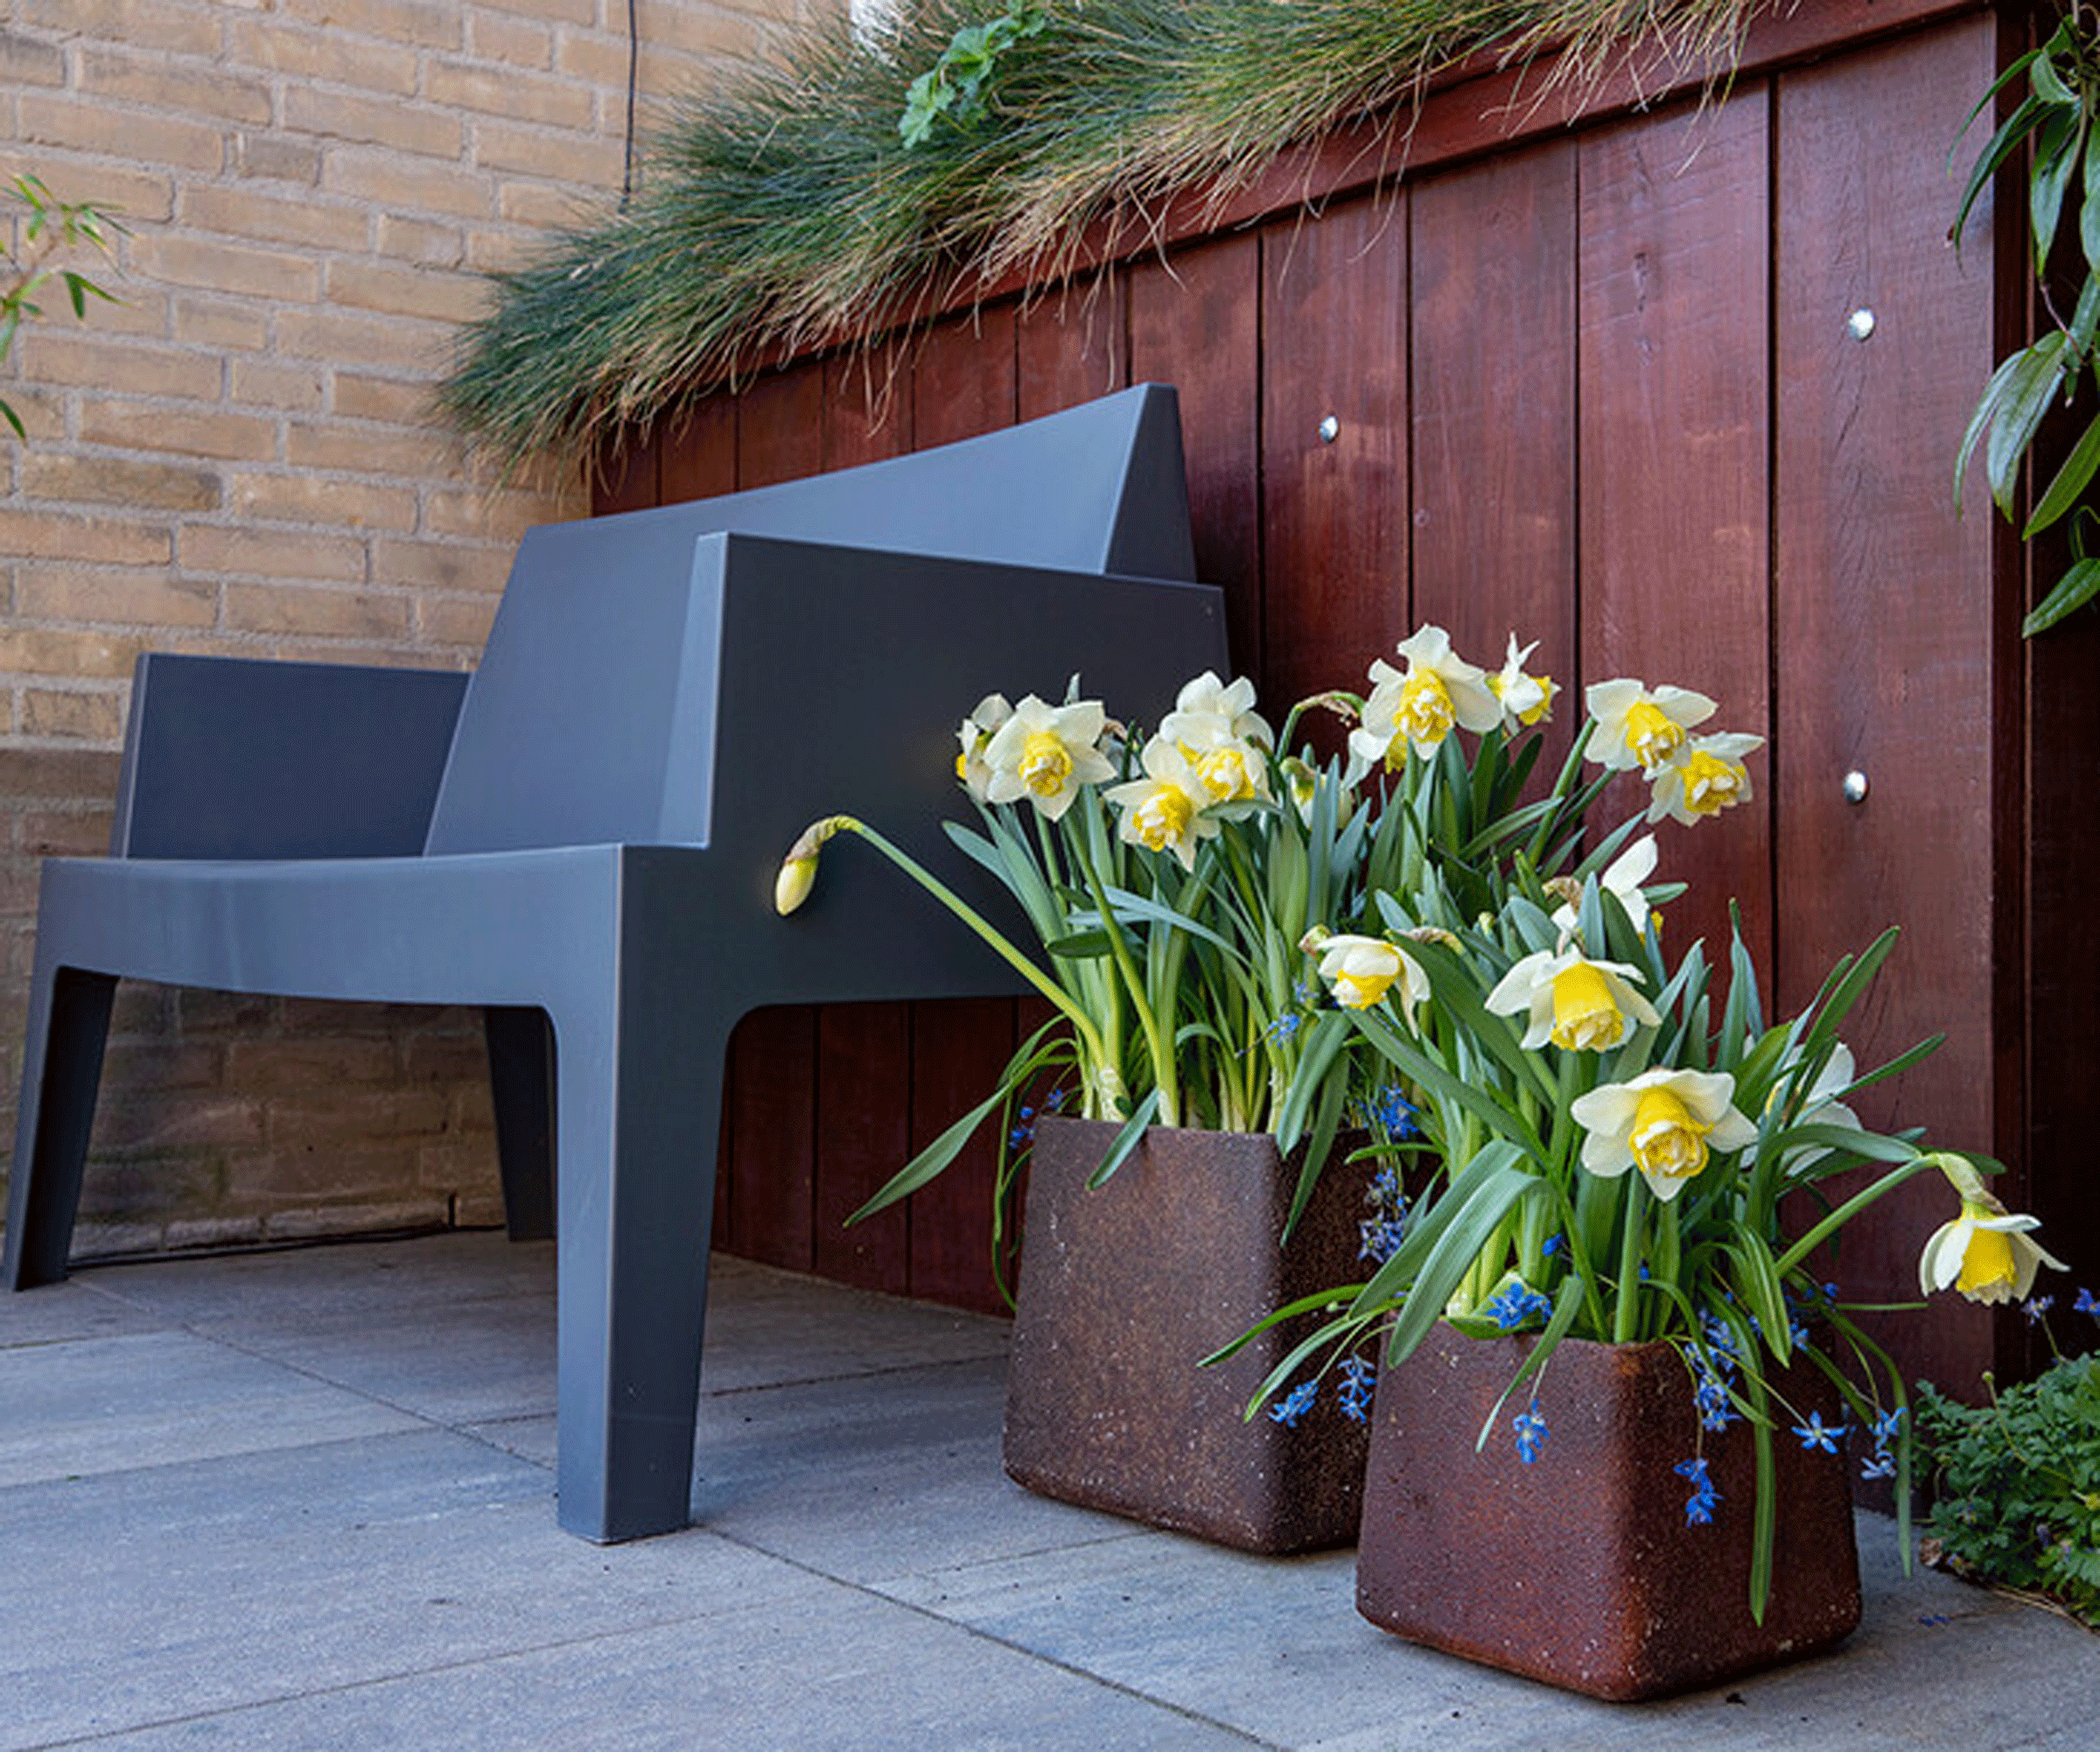 spring planters Double Pam narcissus and scilla Siberica in planters by bench